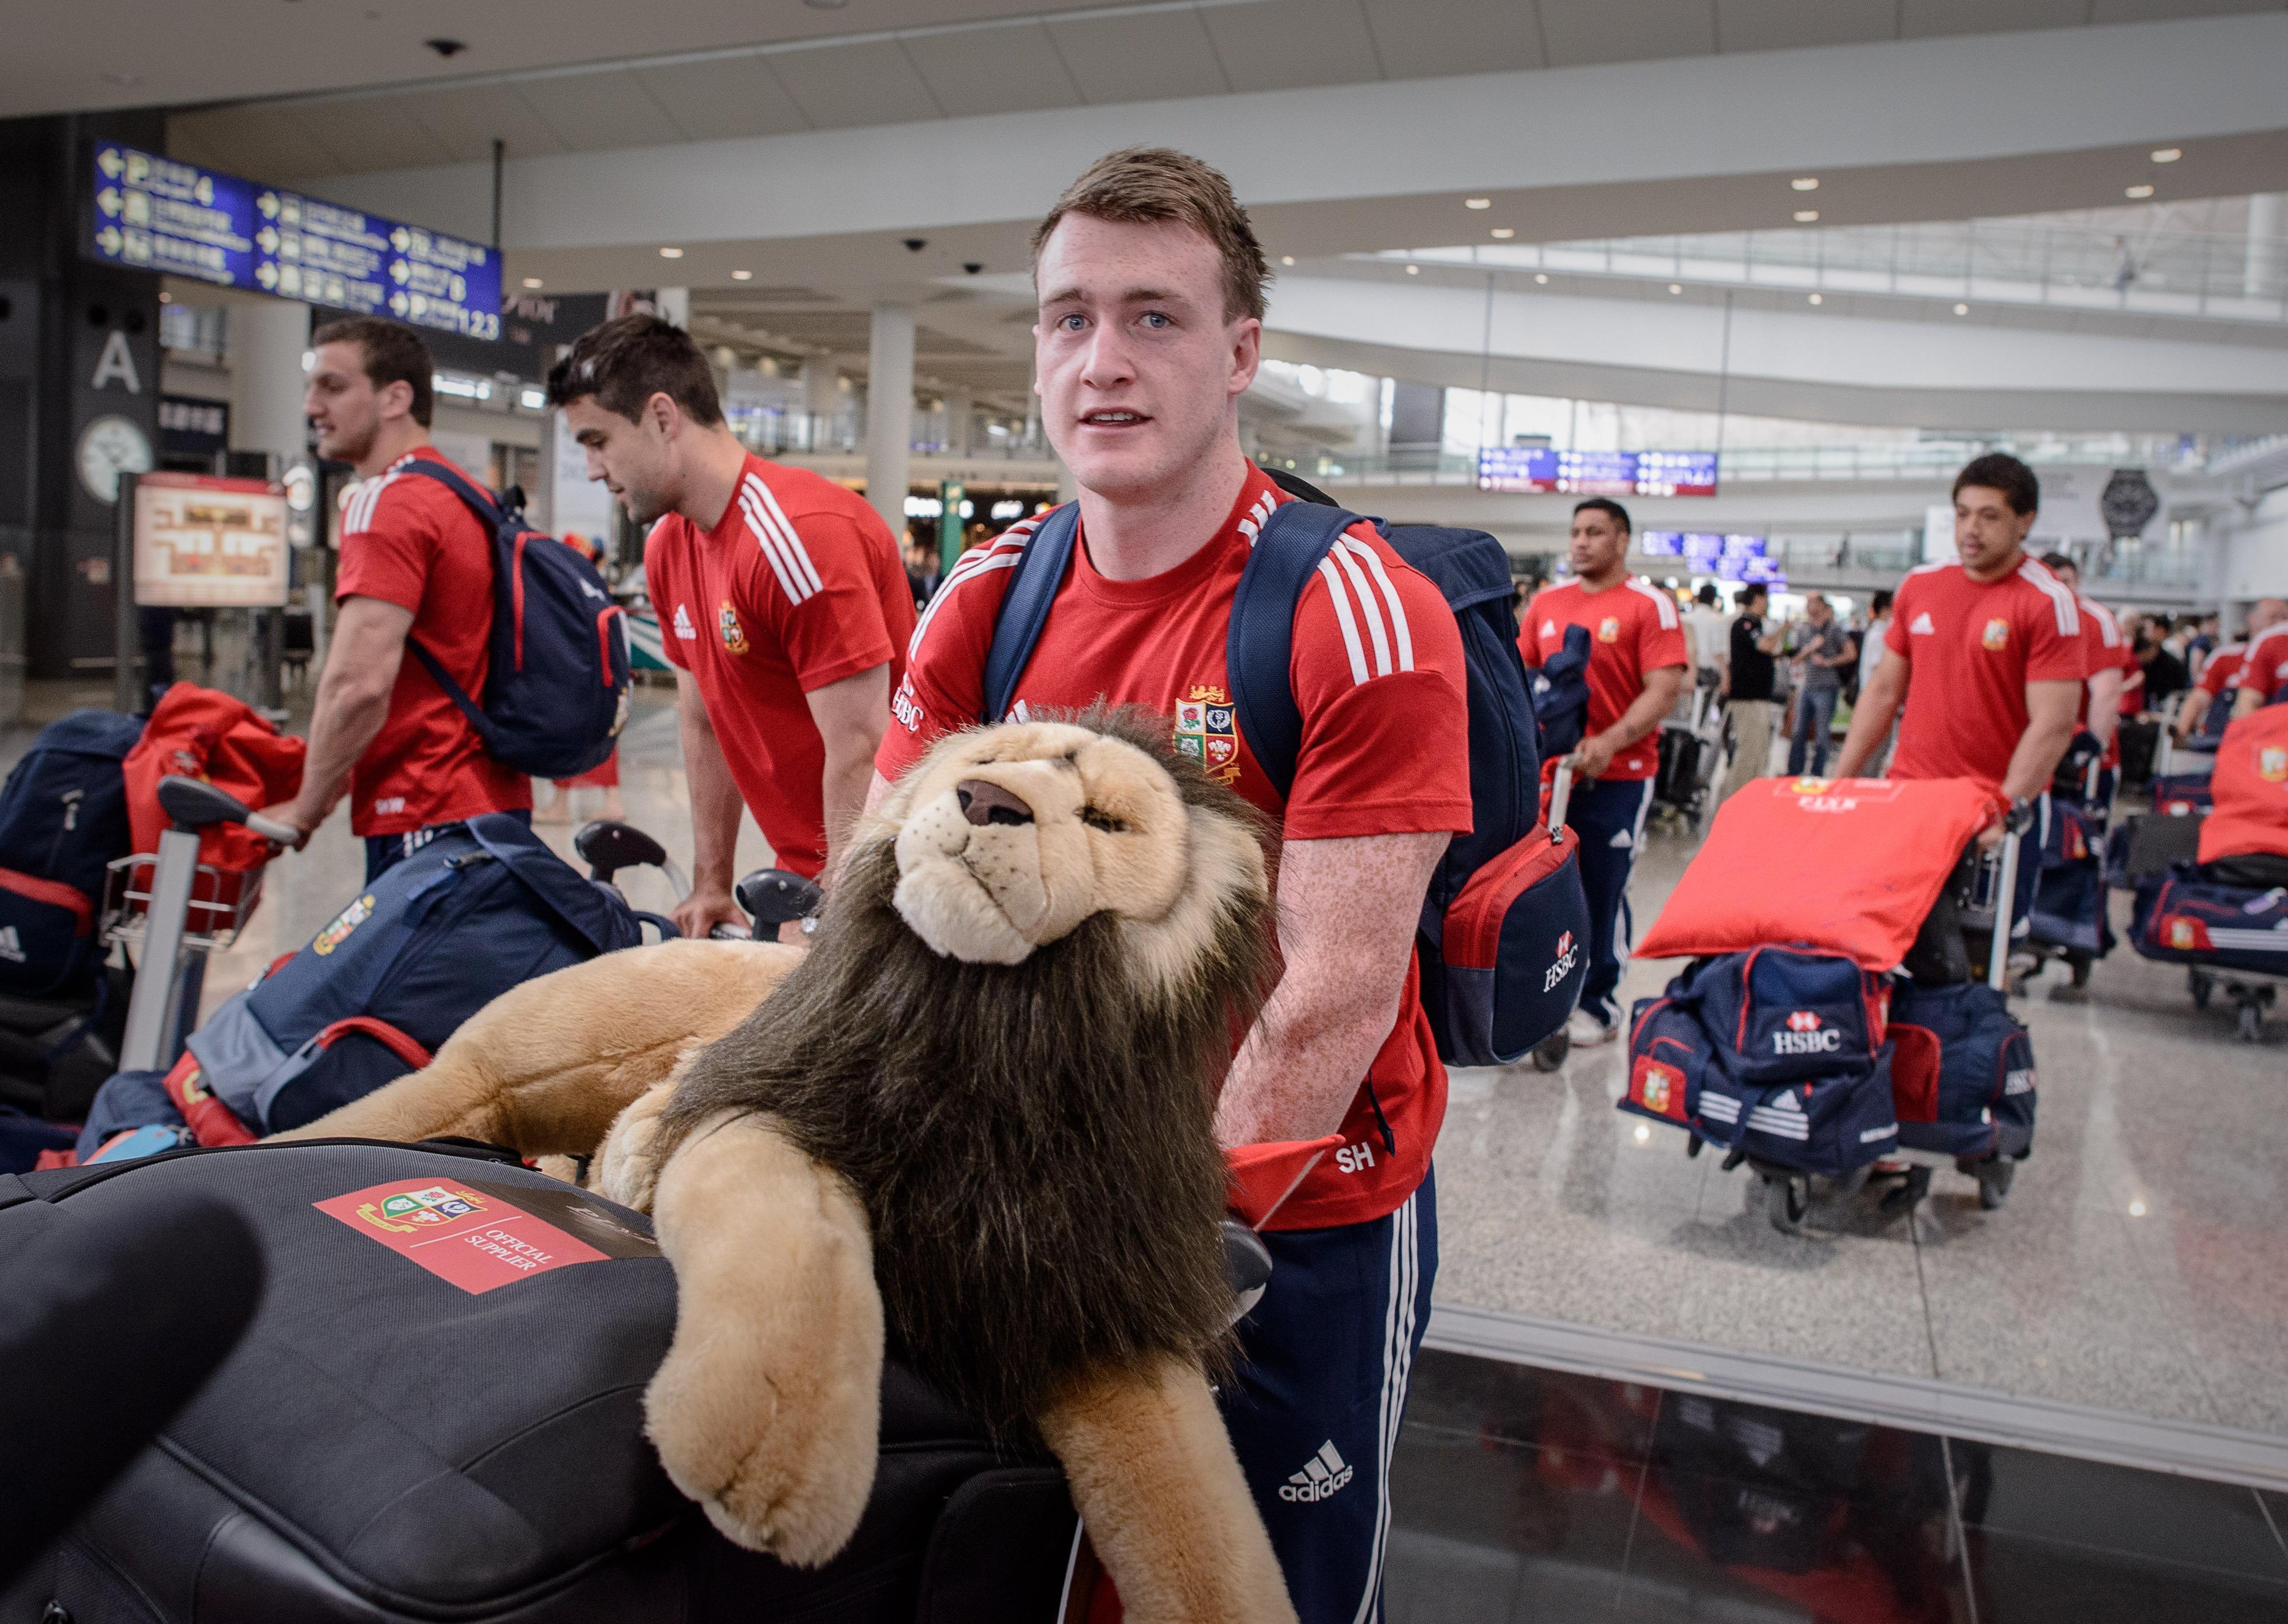 Scottish full-back Stuart Hogg carries the mascot of the British and Irish Lions as he and his teammates arrive in Hong Kong airport on May 28, 2013. The team arrived ahead of a month-long tour of Australia where they will seek their first Test series victory in 16 years. AFP PHOTO / Philippe Lopez        (Photo credit should read PHILIPPE LOPEZ/AFP via Getty Images)